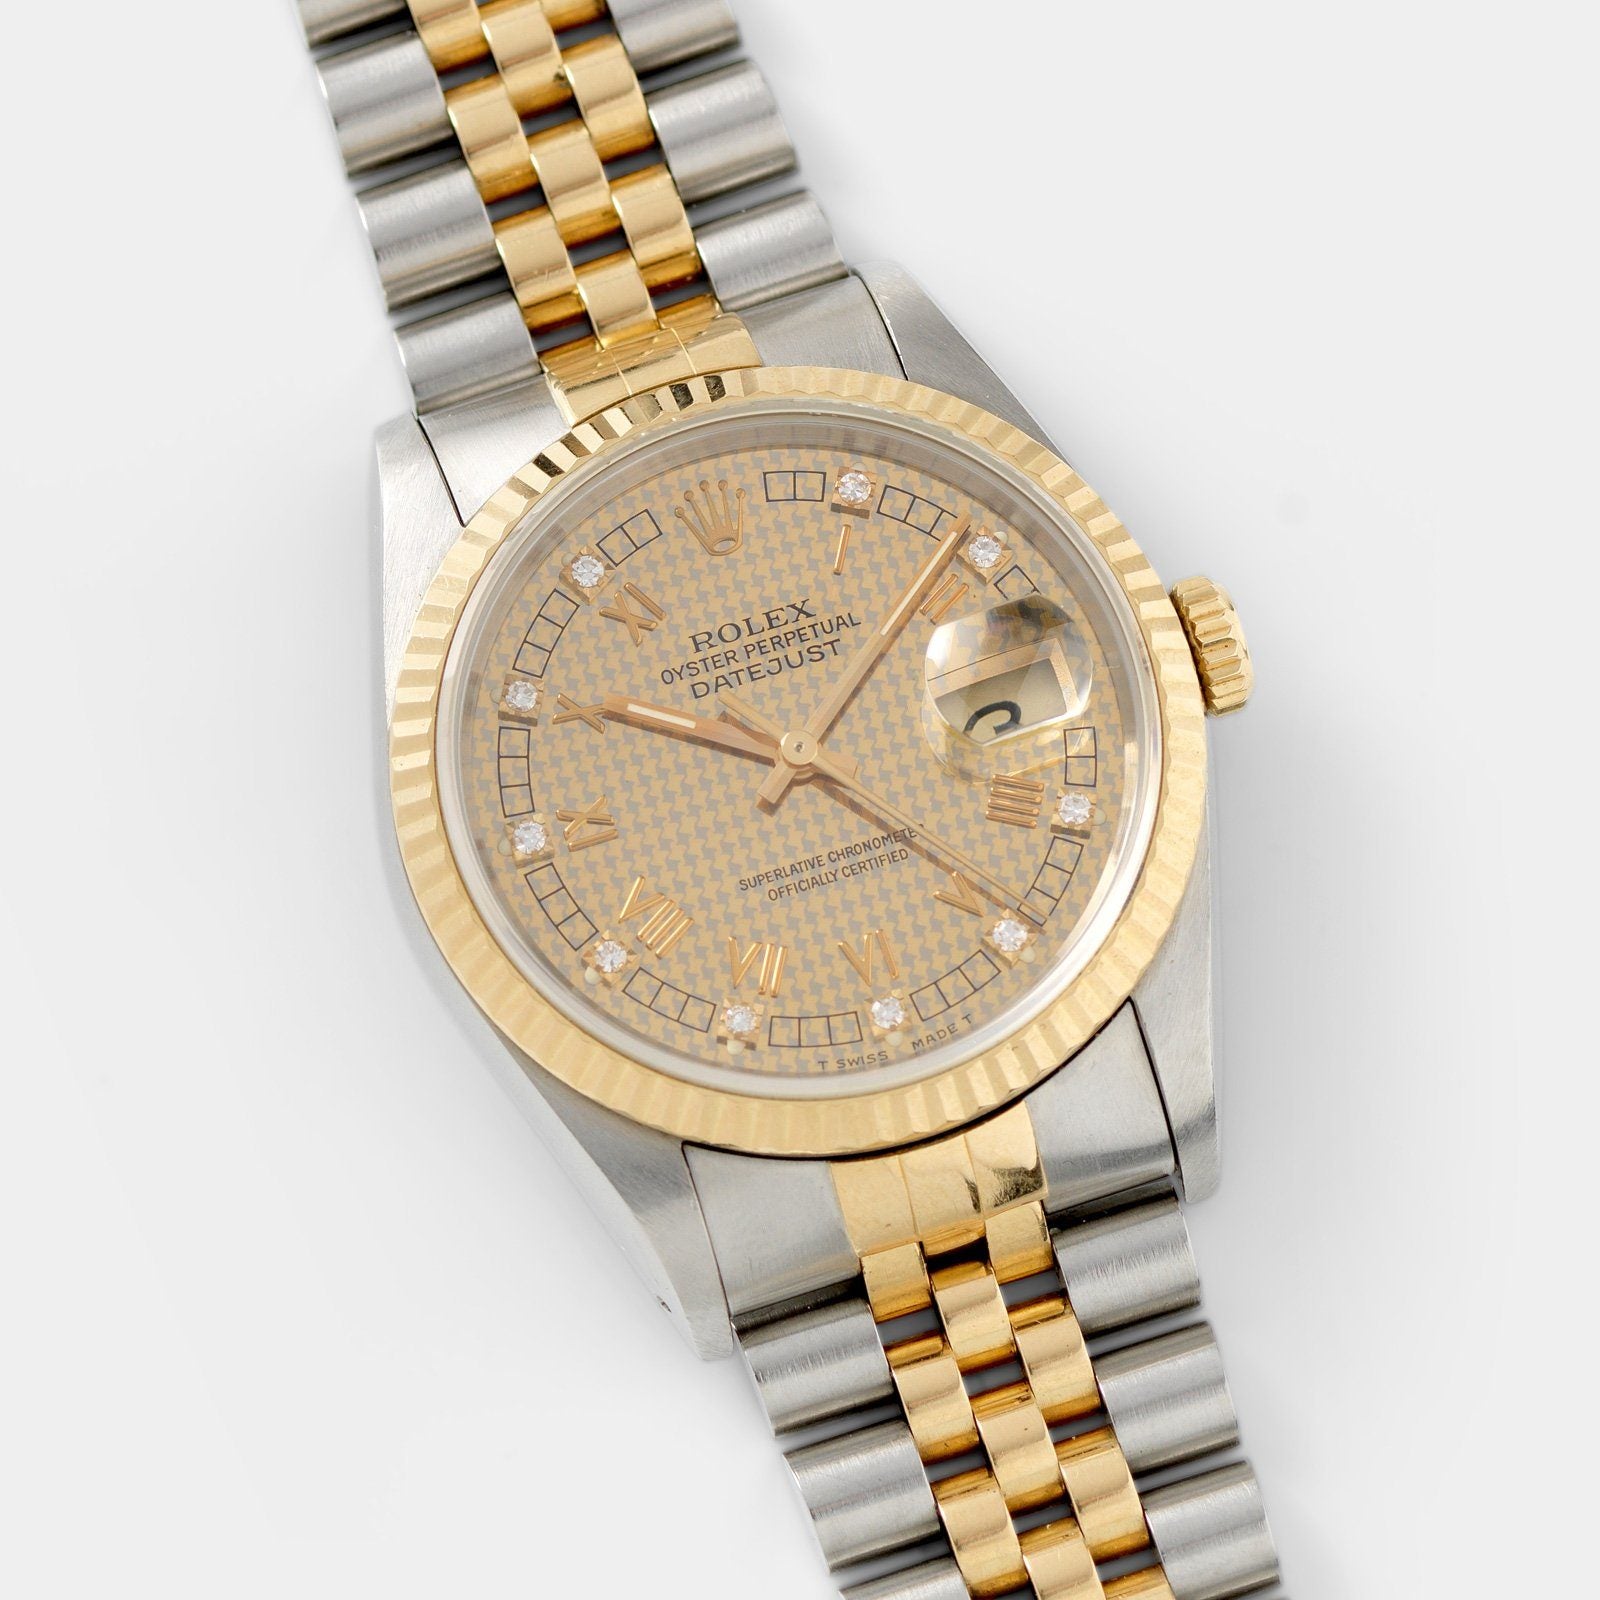 Rolex Datejust Tweed and Diamond Dial Reference 16233